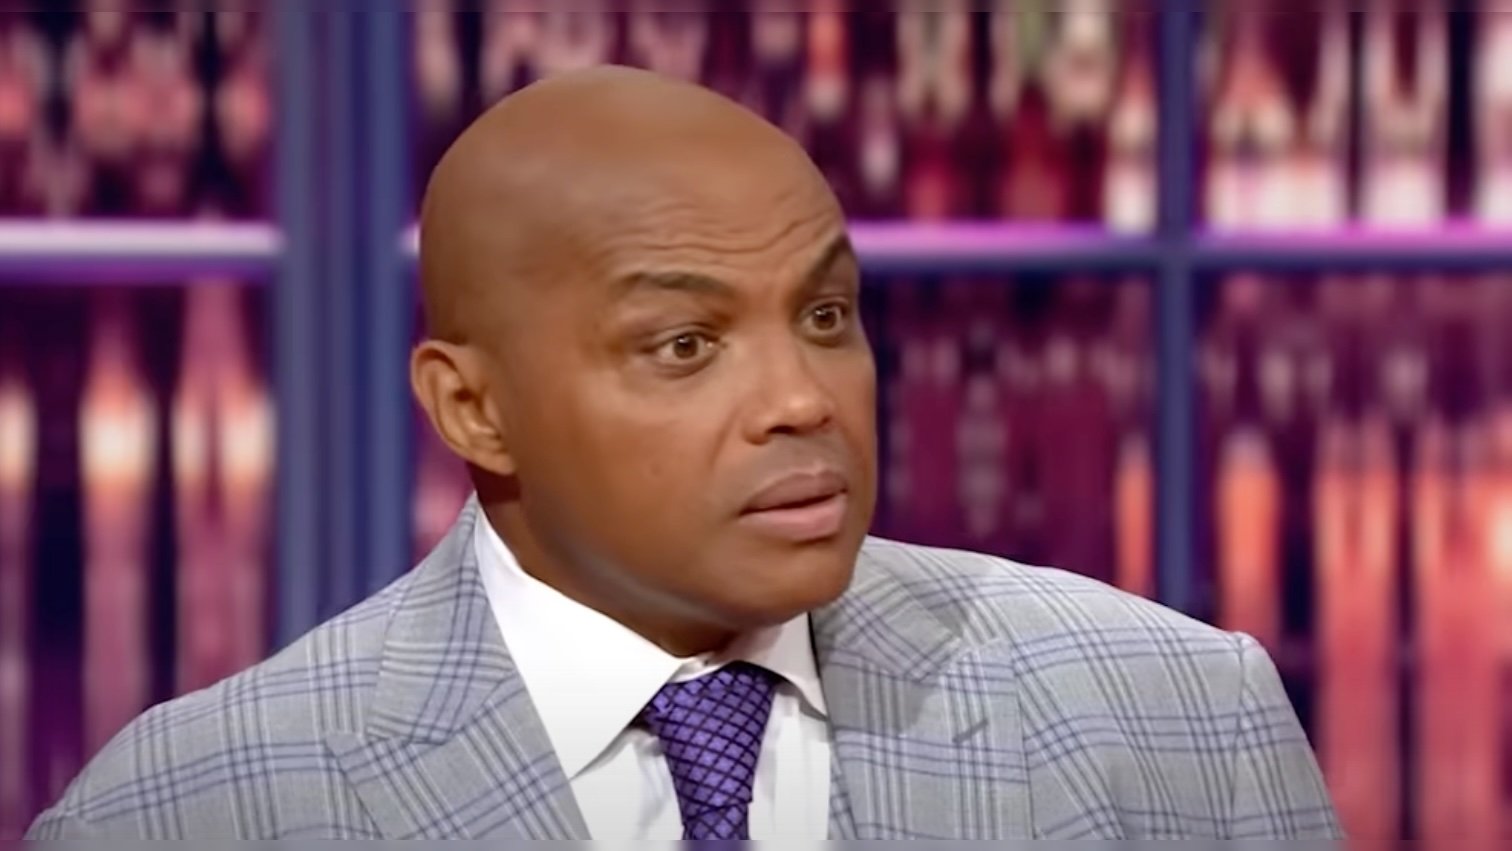 CNN Cancels Charles Barkley’s Show Over Horrific Ratings, Barkley Previously Threatened To Punch Black People Wearing Trump Mugshot Shirts During Episode